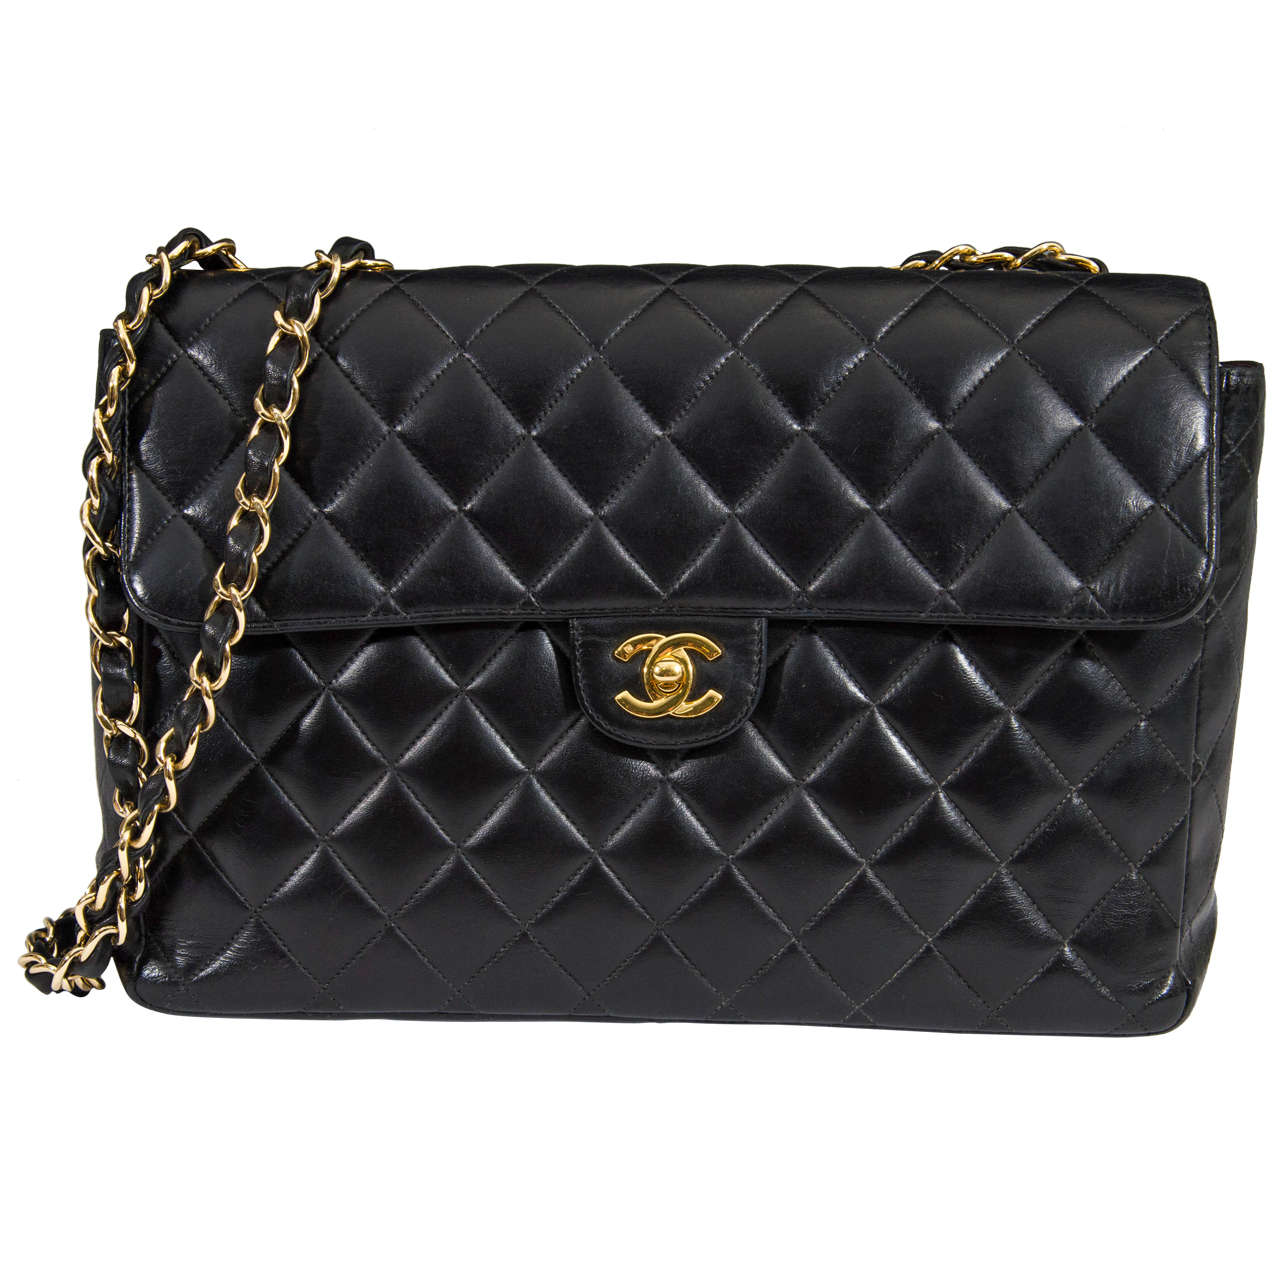 Authentic Chanel Black Classic Lambskin Maxi Handbag with Gold Tone Hardware at 1stdibs